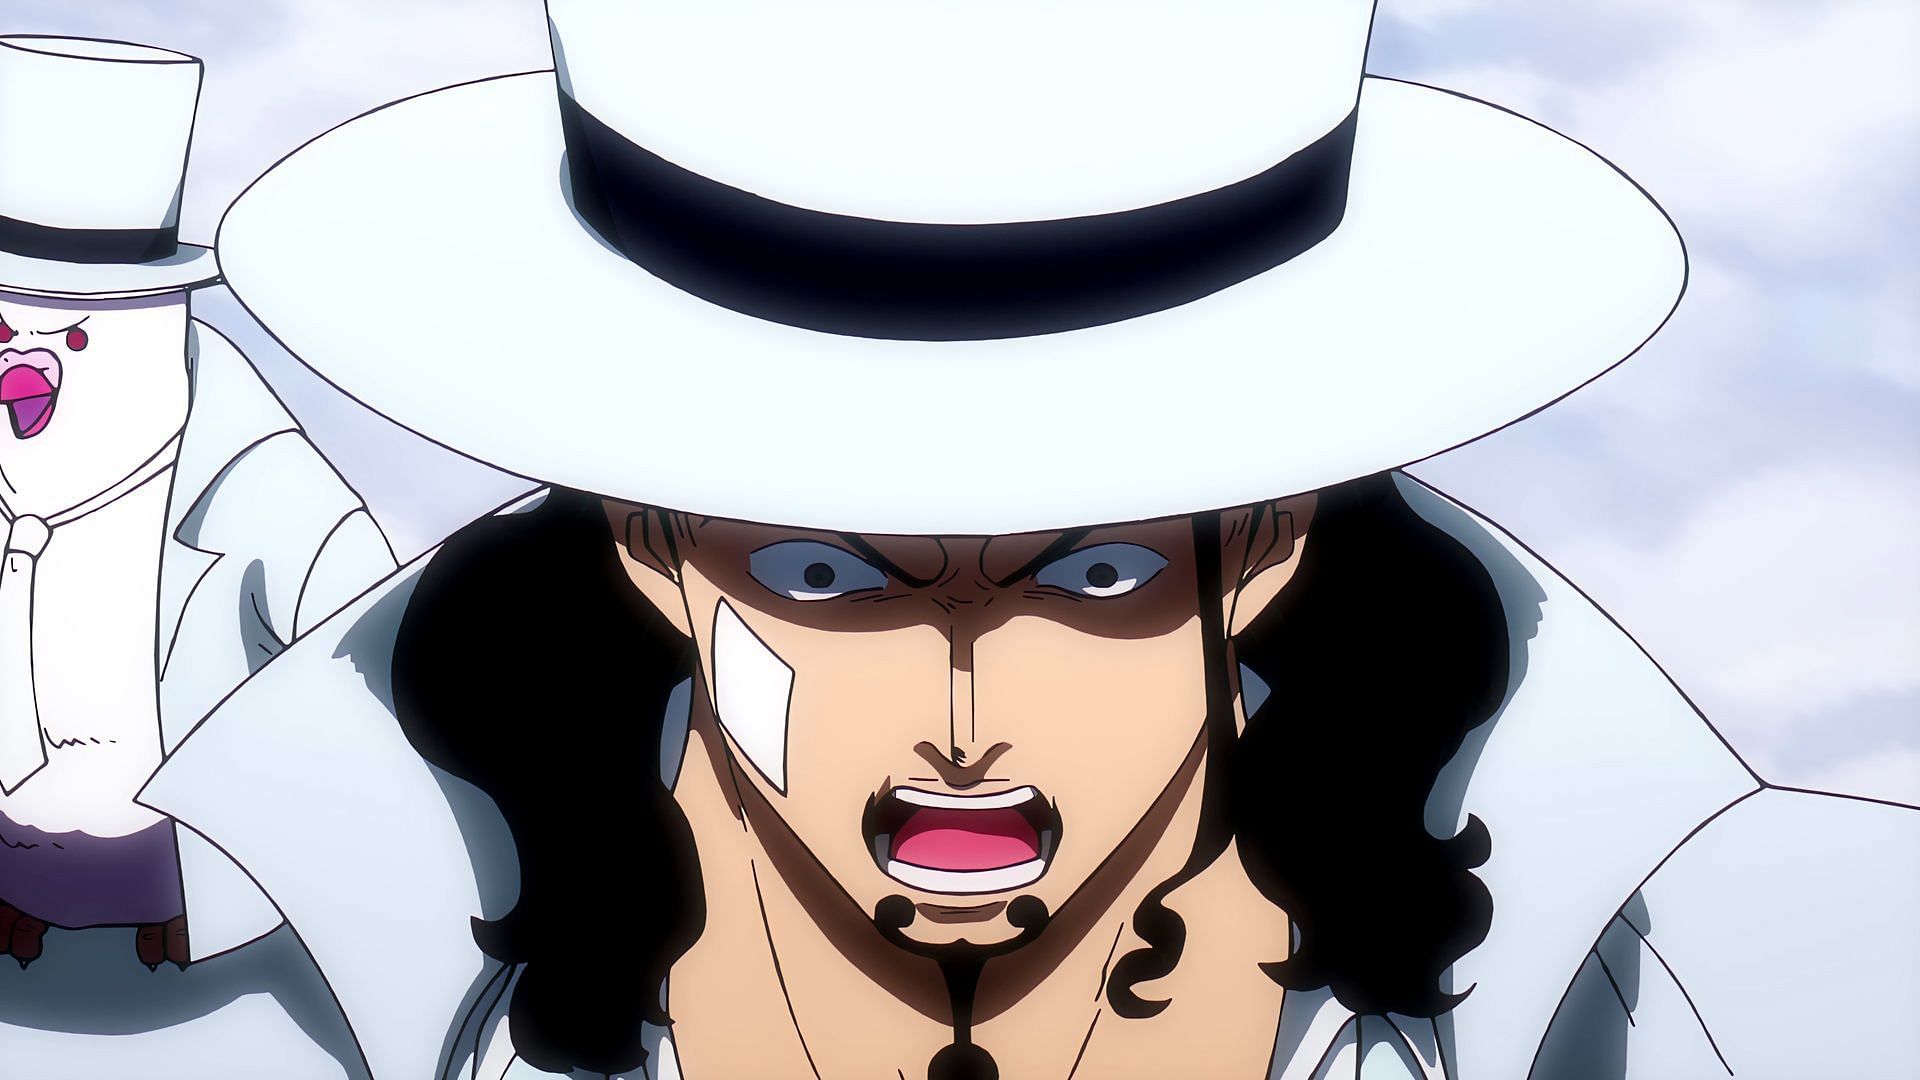 Lucci shocked at what Stussy did (Image via Toei Animation)